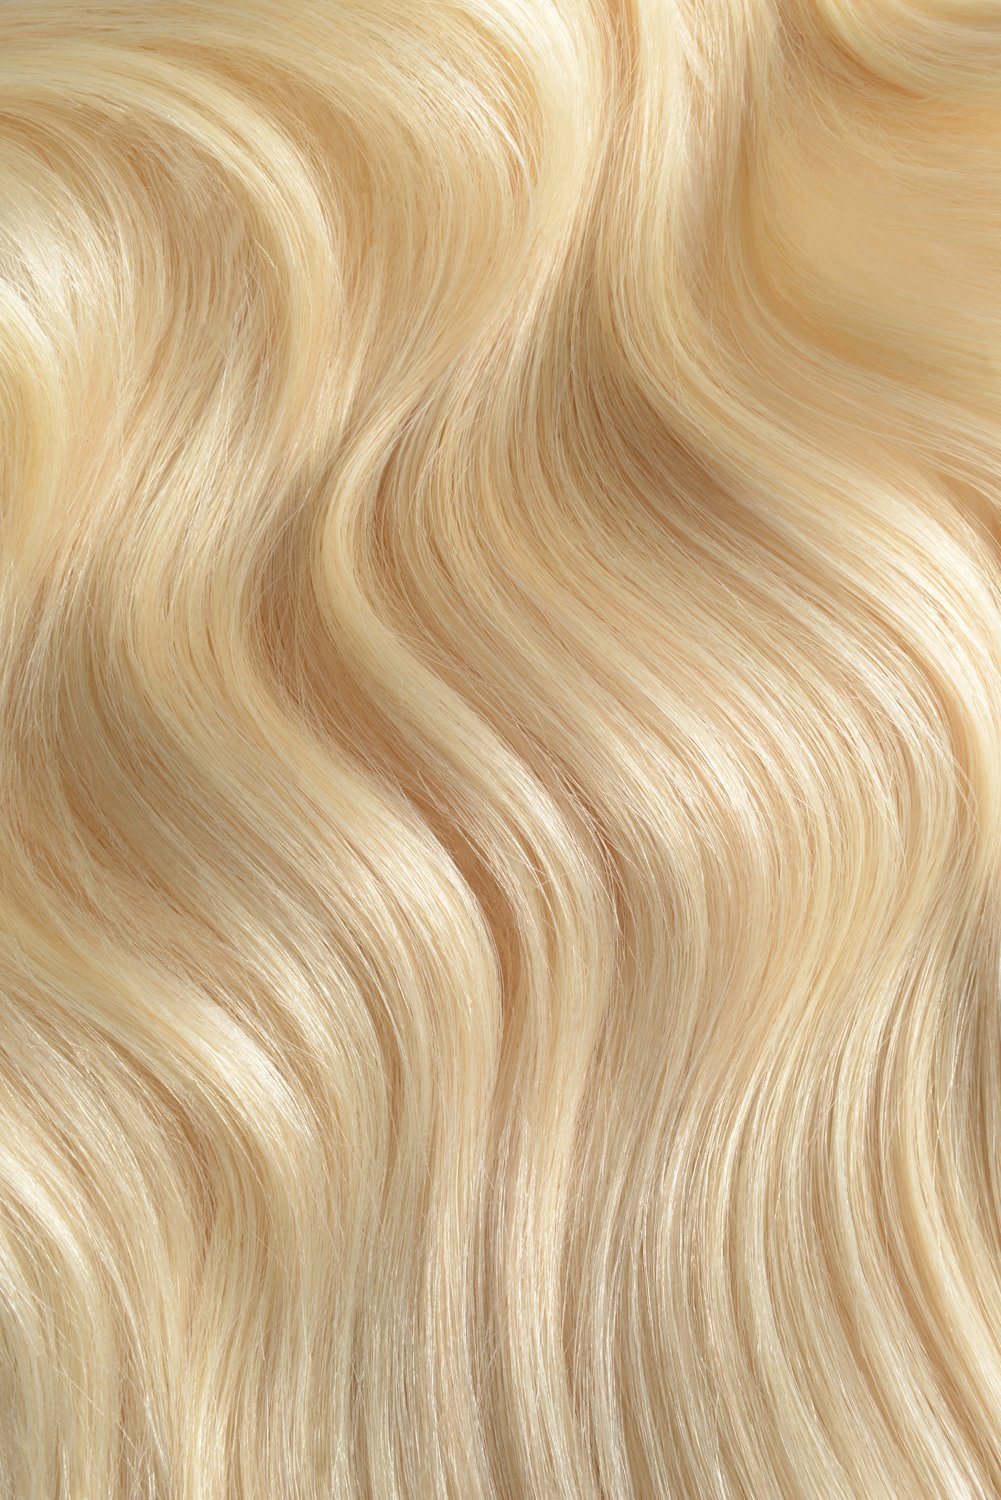 Blonde Micro Ring Hair Extensions